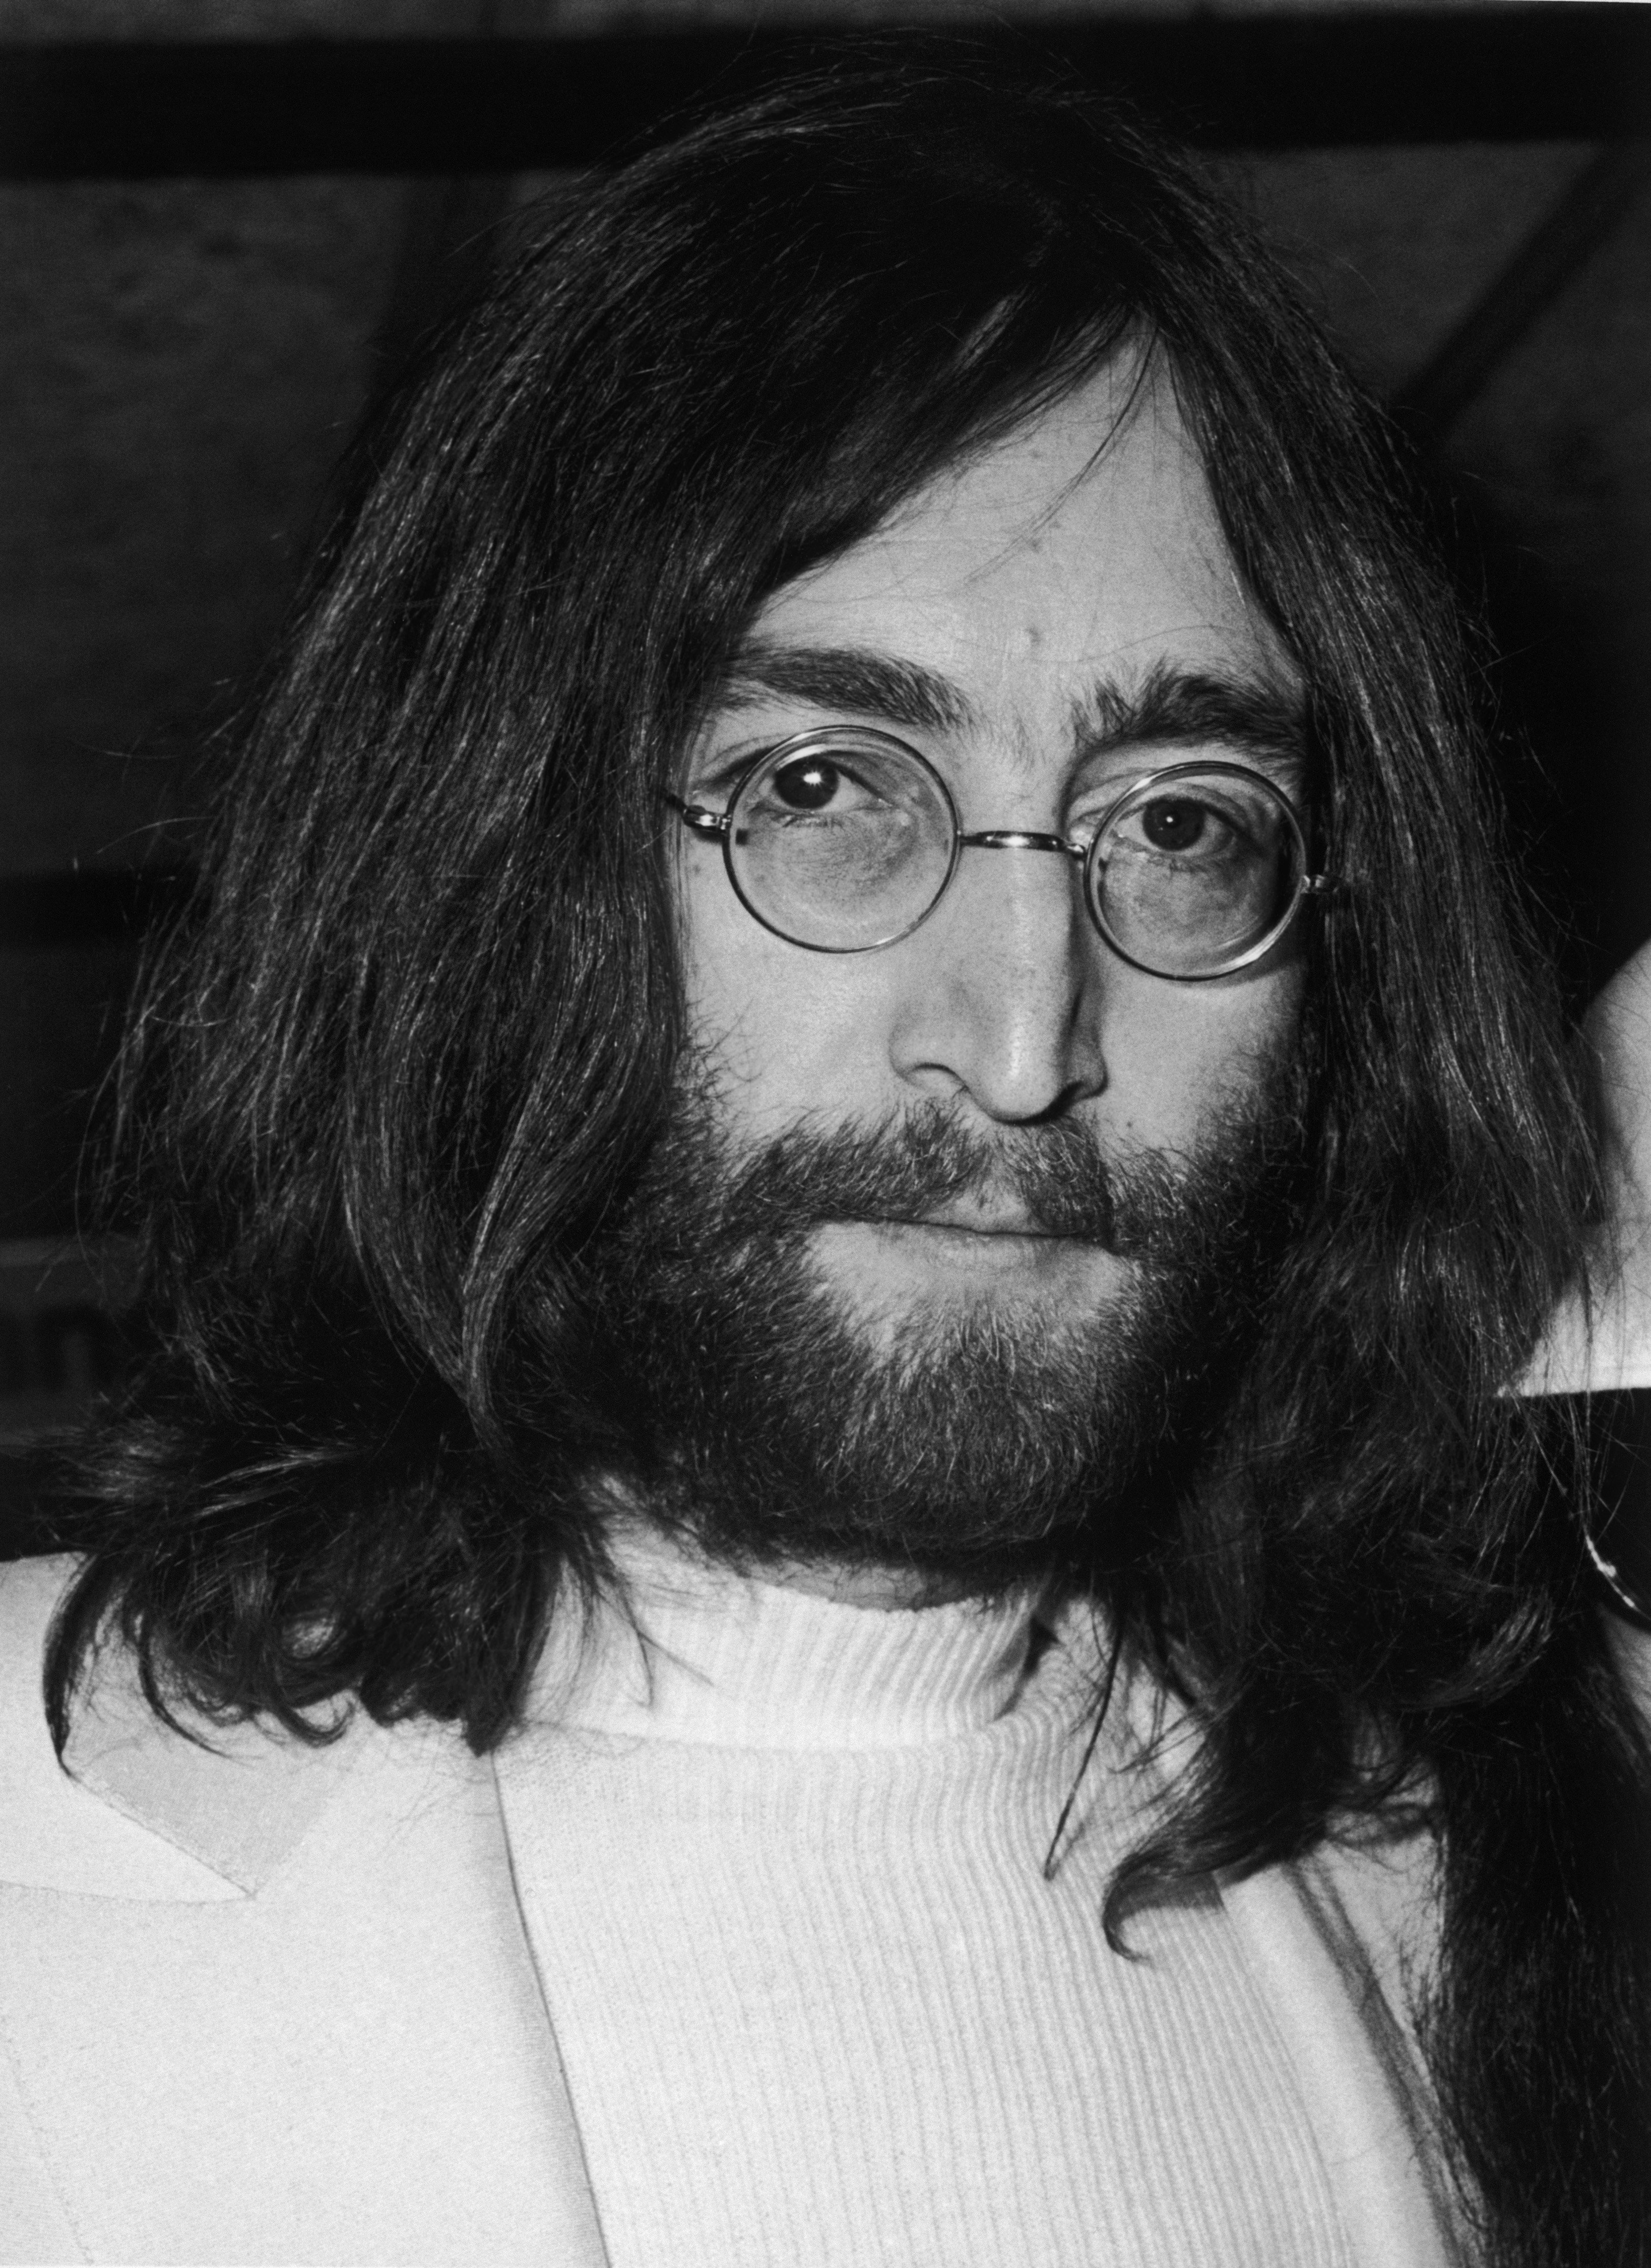 The late John Lennon Beatles, at a press conference at Heathrow airport on his return from honeymoon with Yoko Ono. | Source: Getty Images